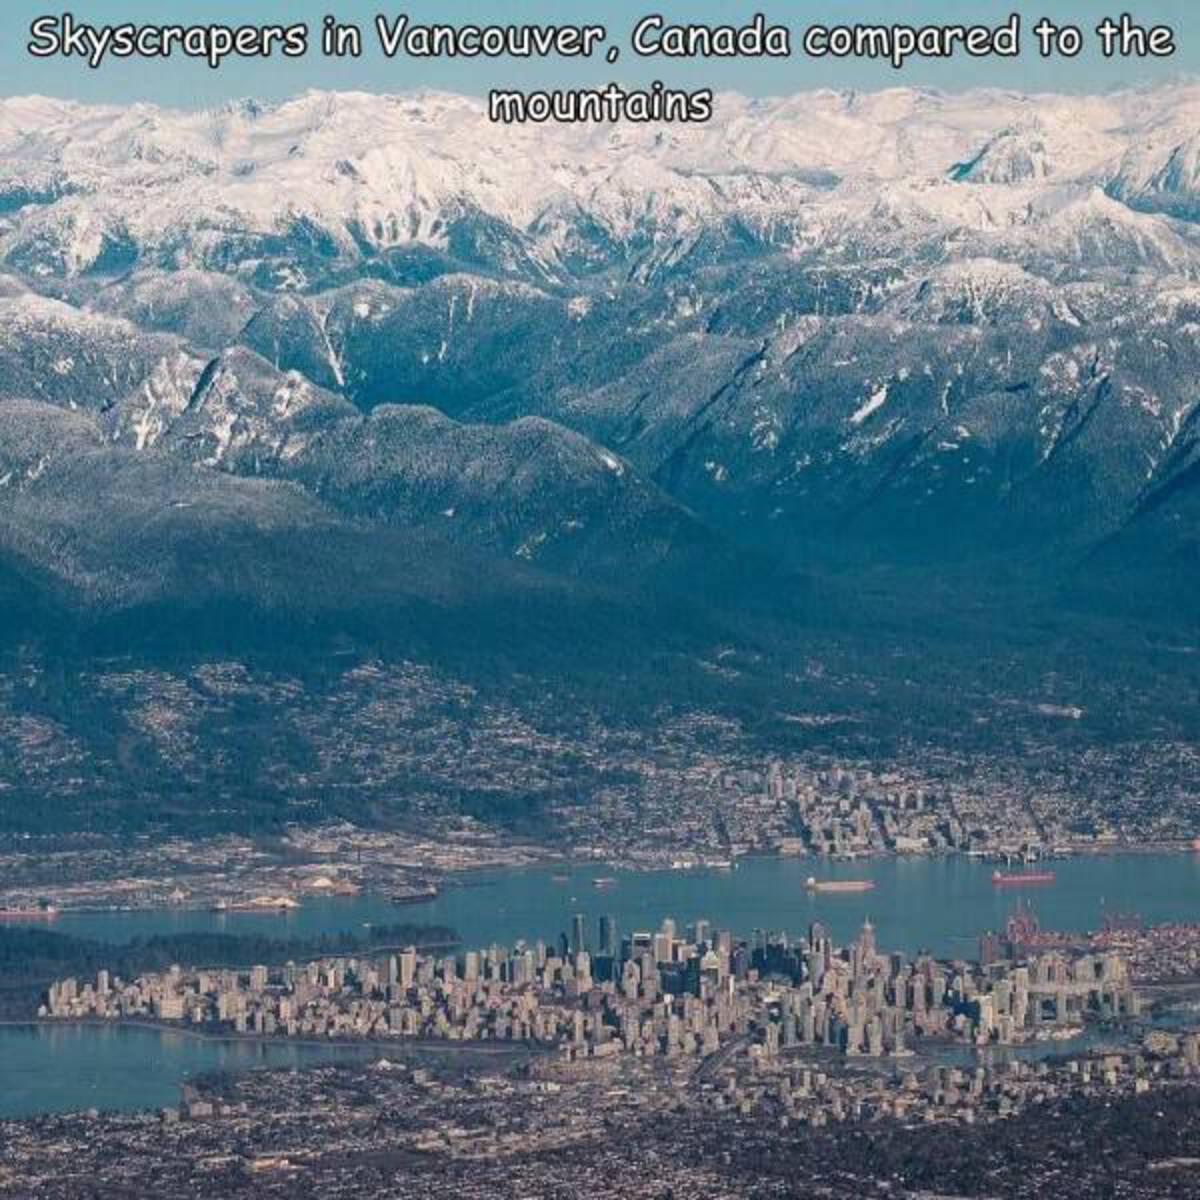 mount seymour - Skyscrapers in Vancouver, Canada compared to the mountains